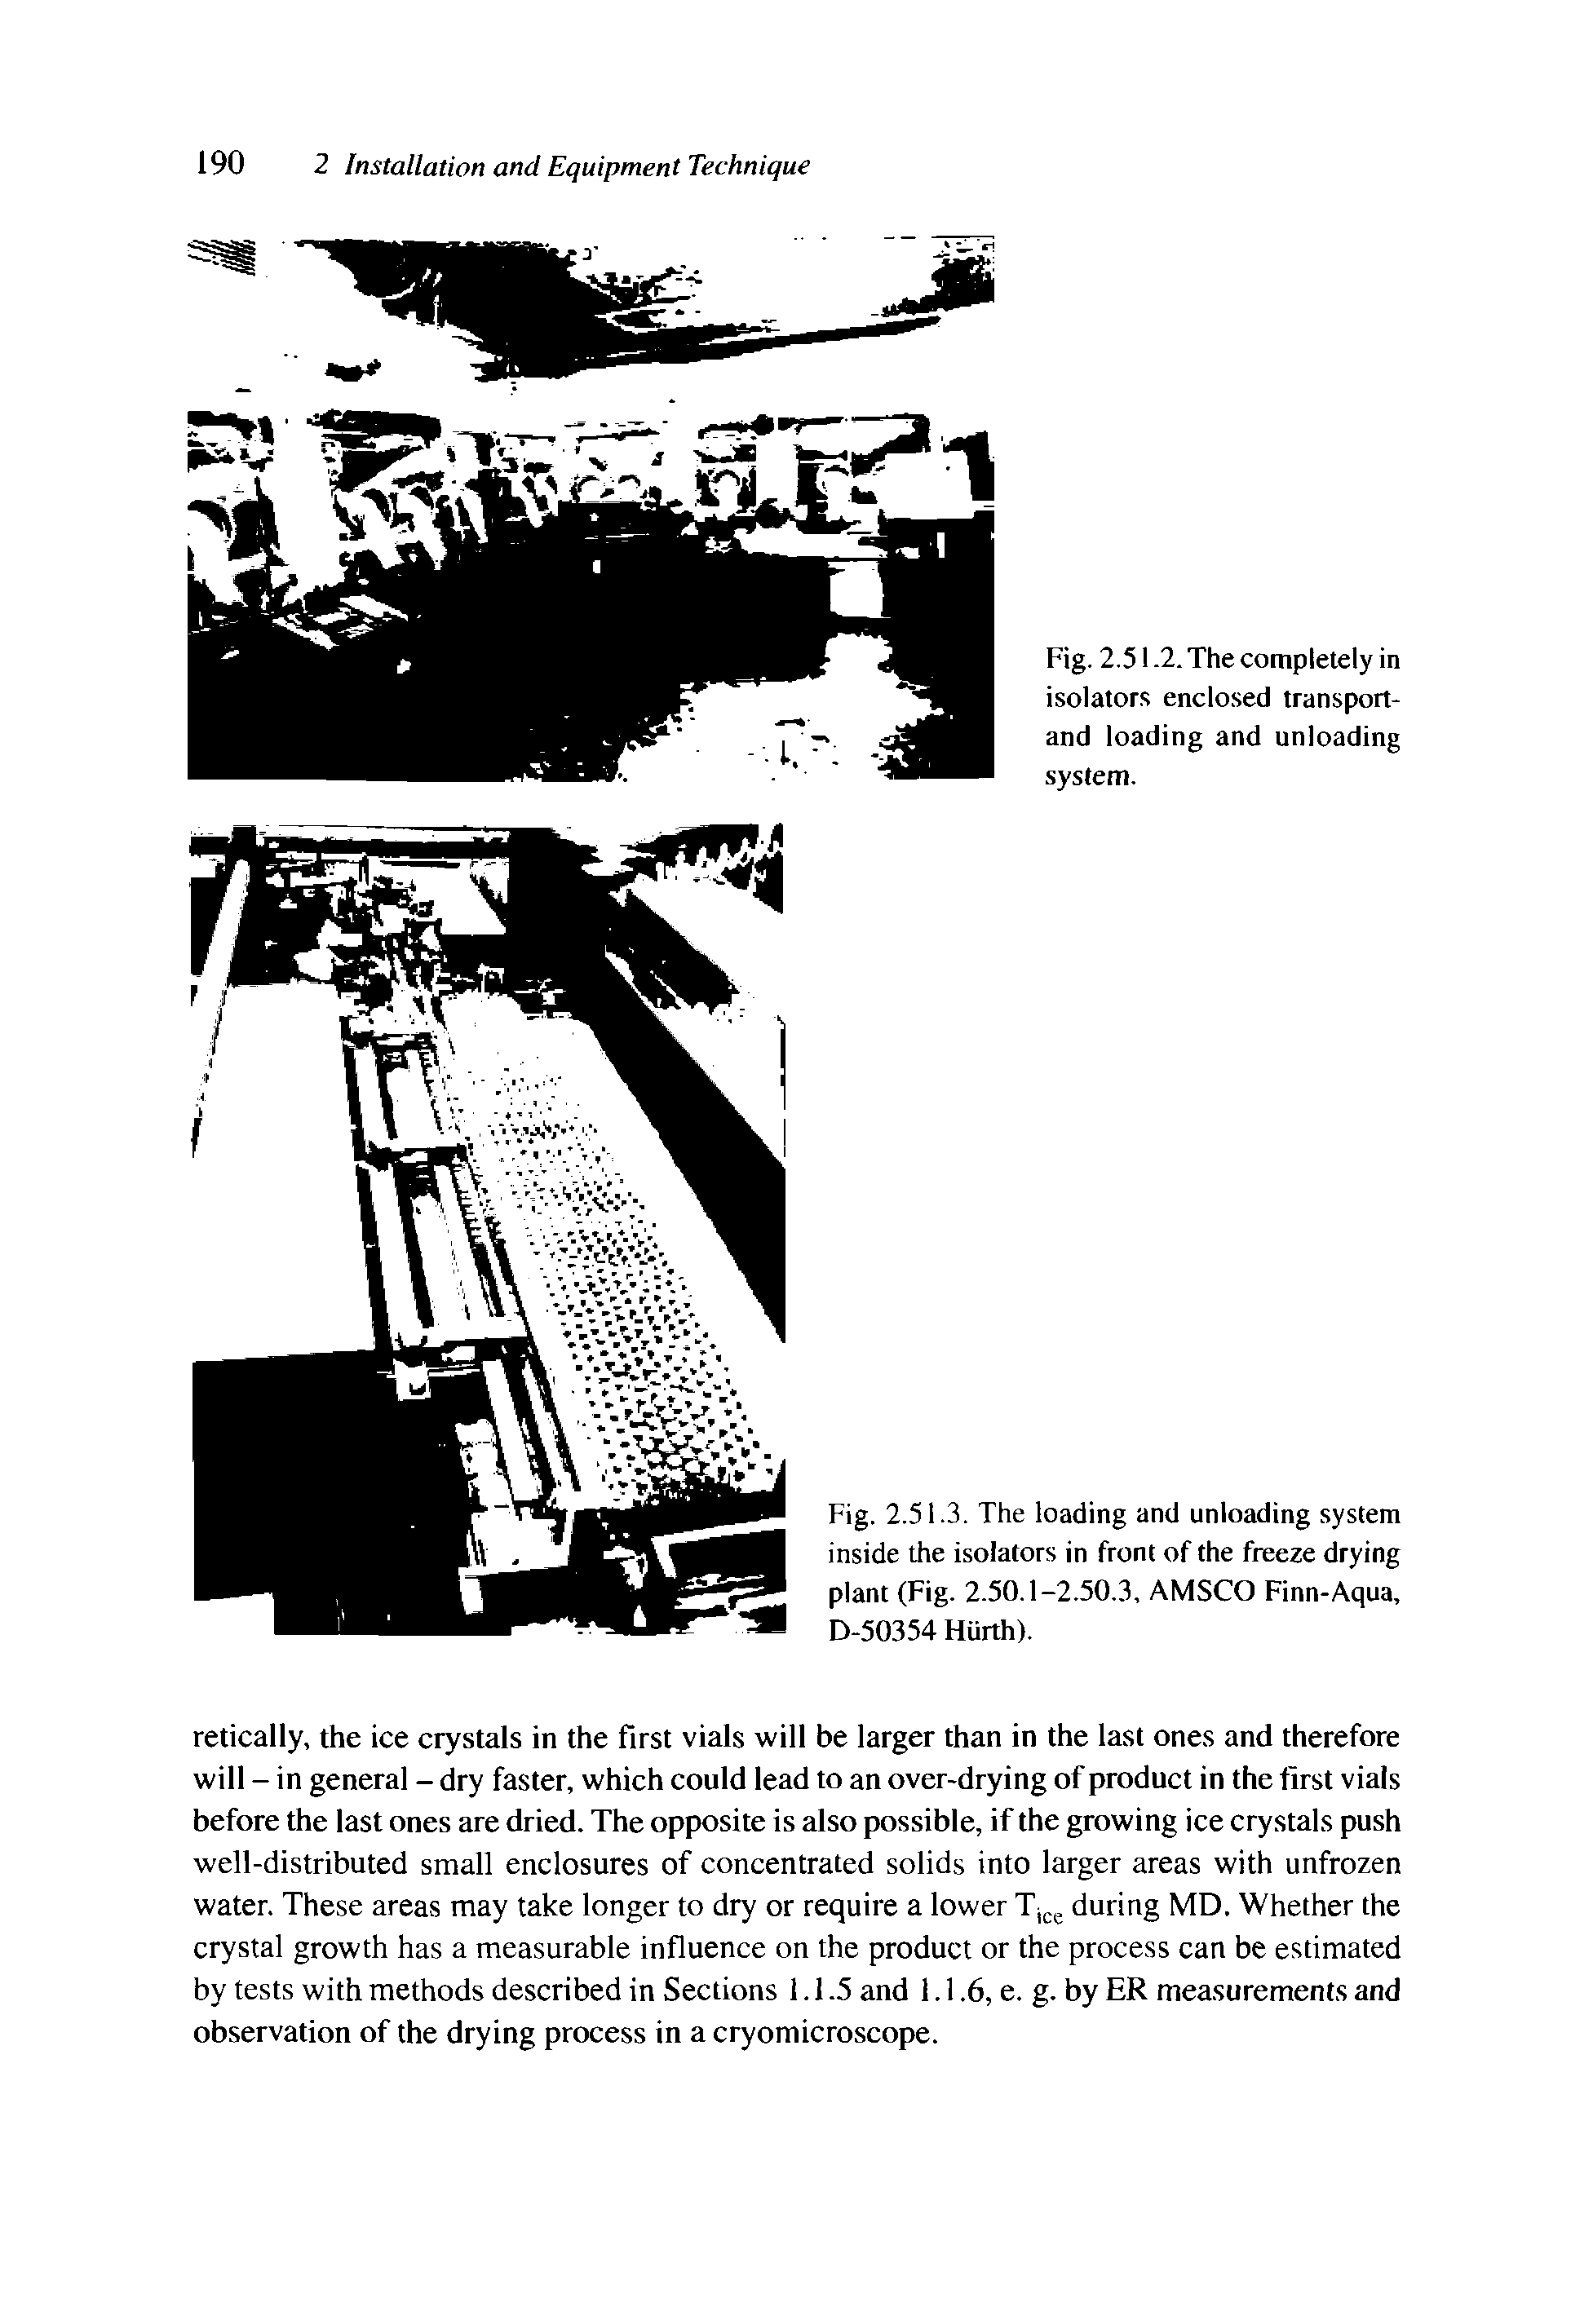 Fig. 2.51.3. The loading and unloading system inside the isolators in front of the freeze drying plant (Fig. 2.50.1-2.50.3, AMSCO Finn-Aqua, D-50354 Hiirth).